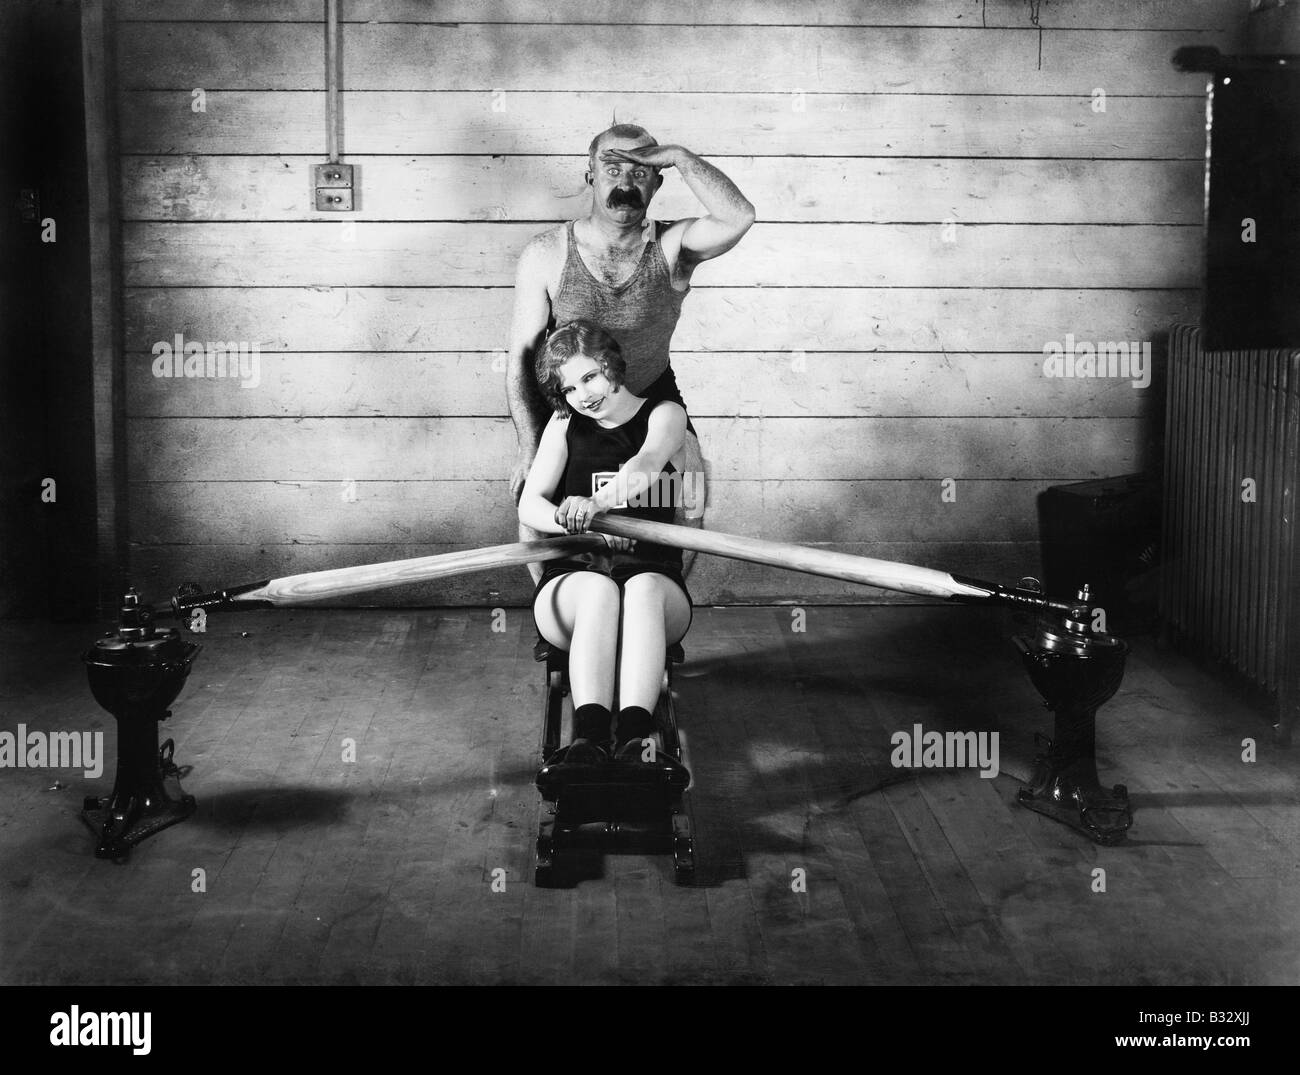 Woman sitting on a rowing machine with a man behind her Stock Photo